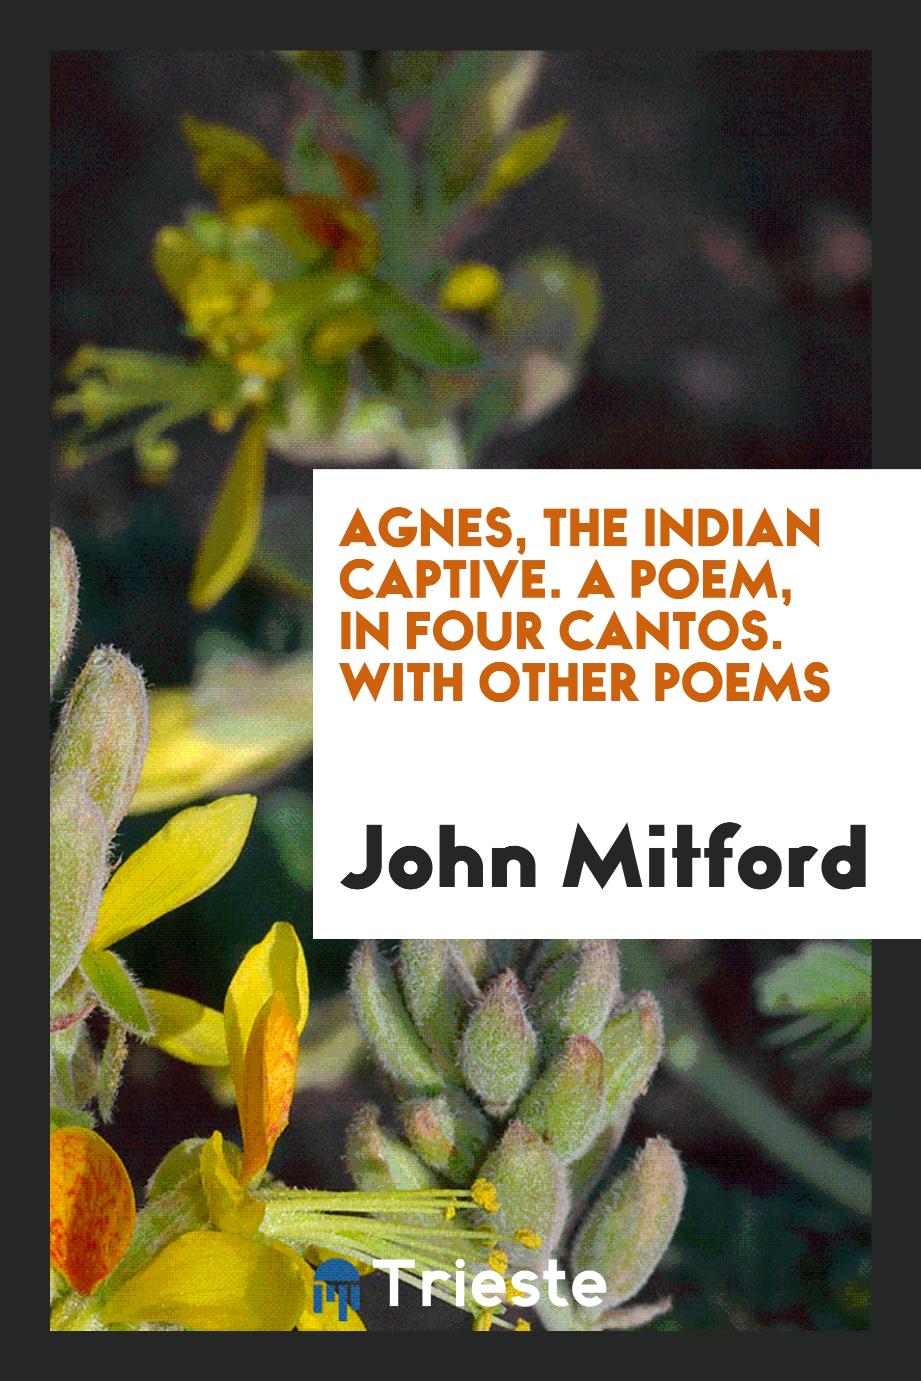 John Mitford - Agnes, the Indian captive. A poem, in four cantos. With other poems